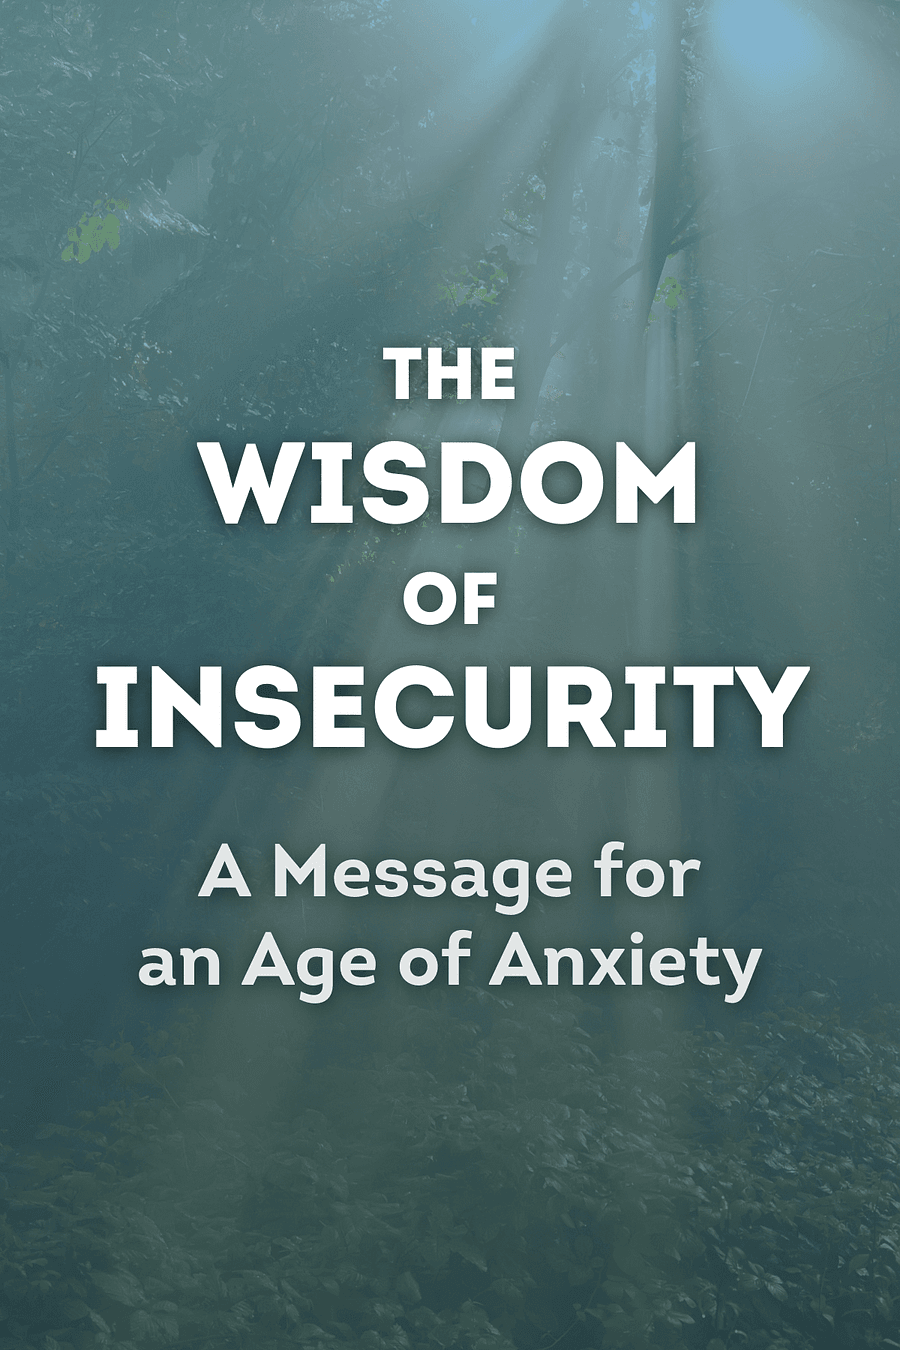 The Wisdom of Insecurity by Alan Watts - Book Summary